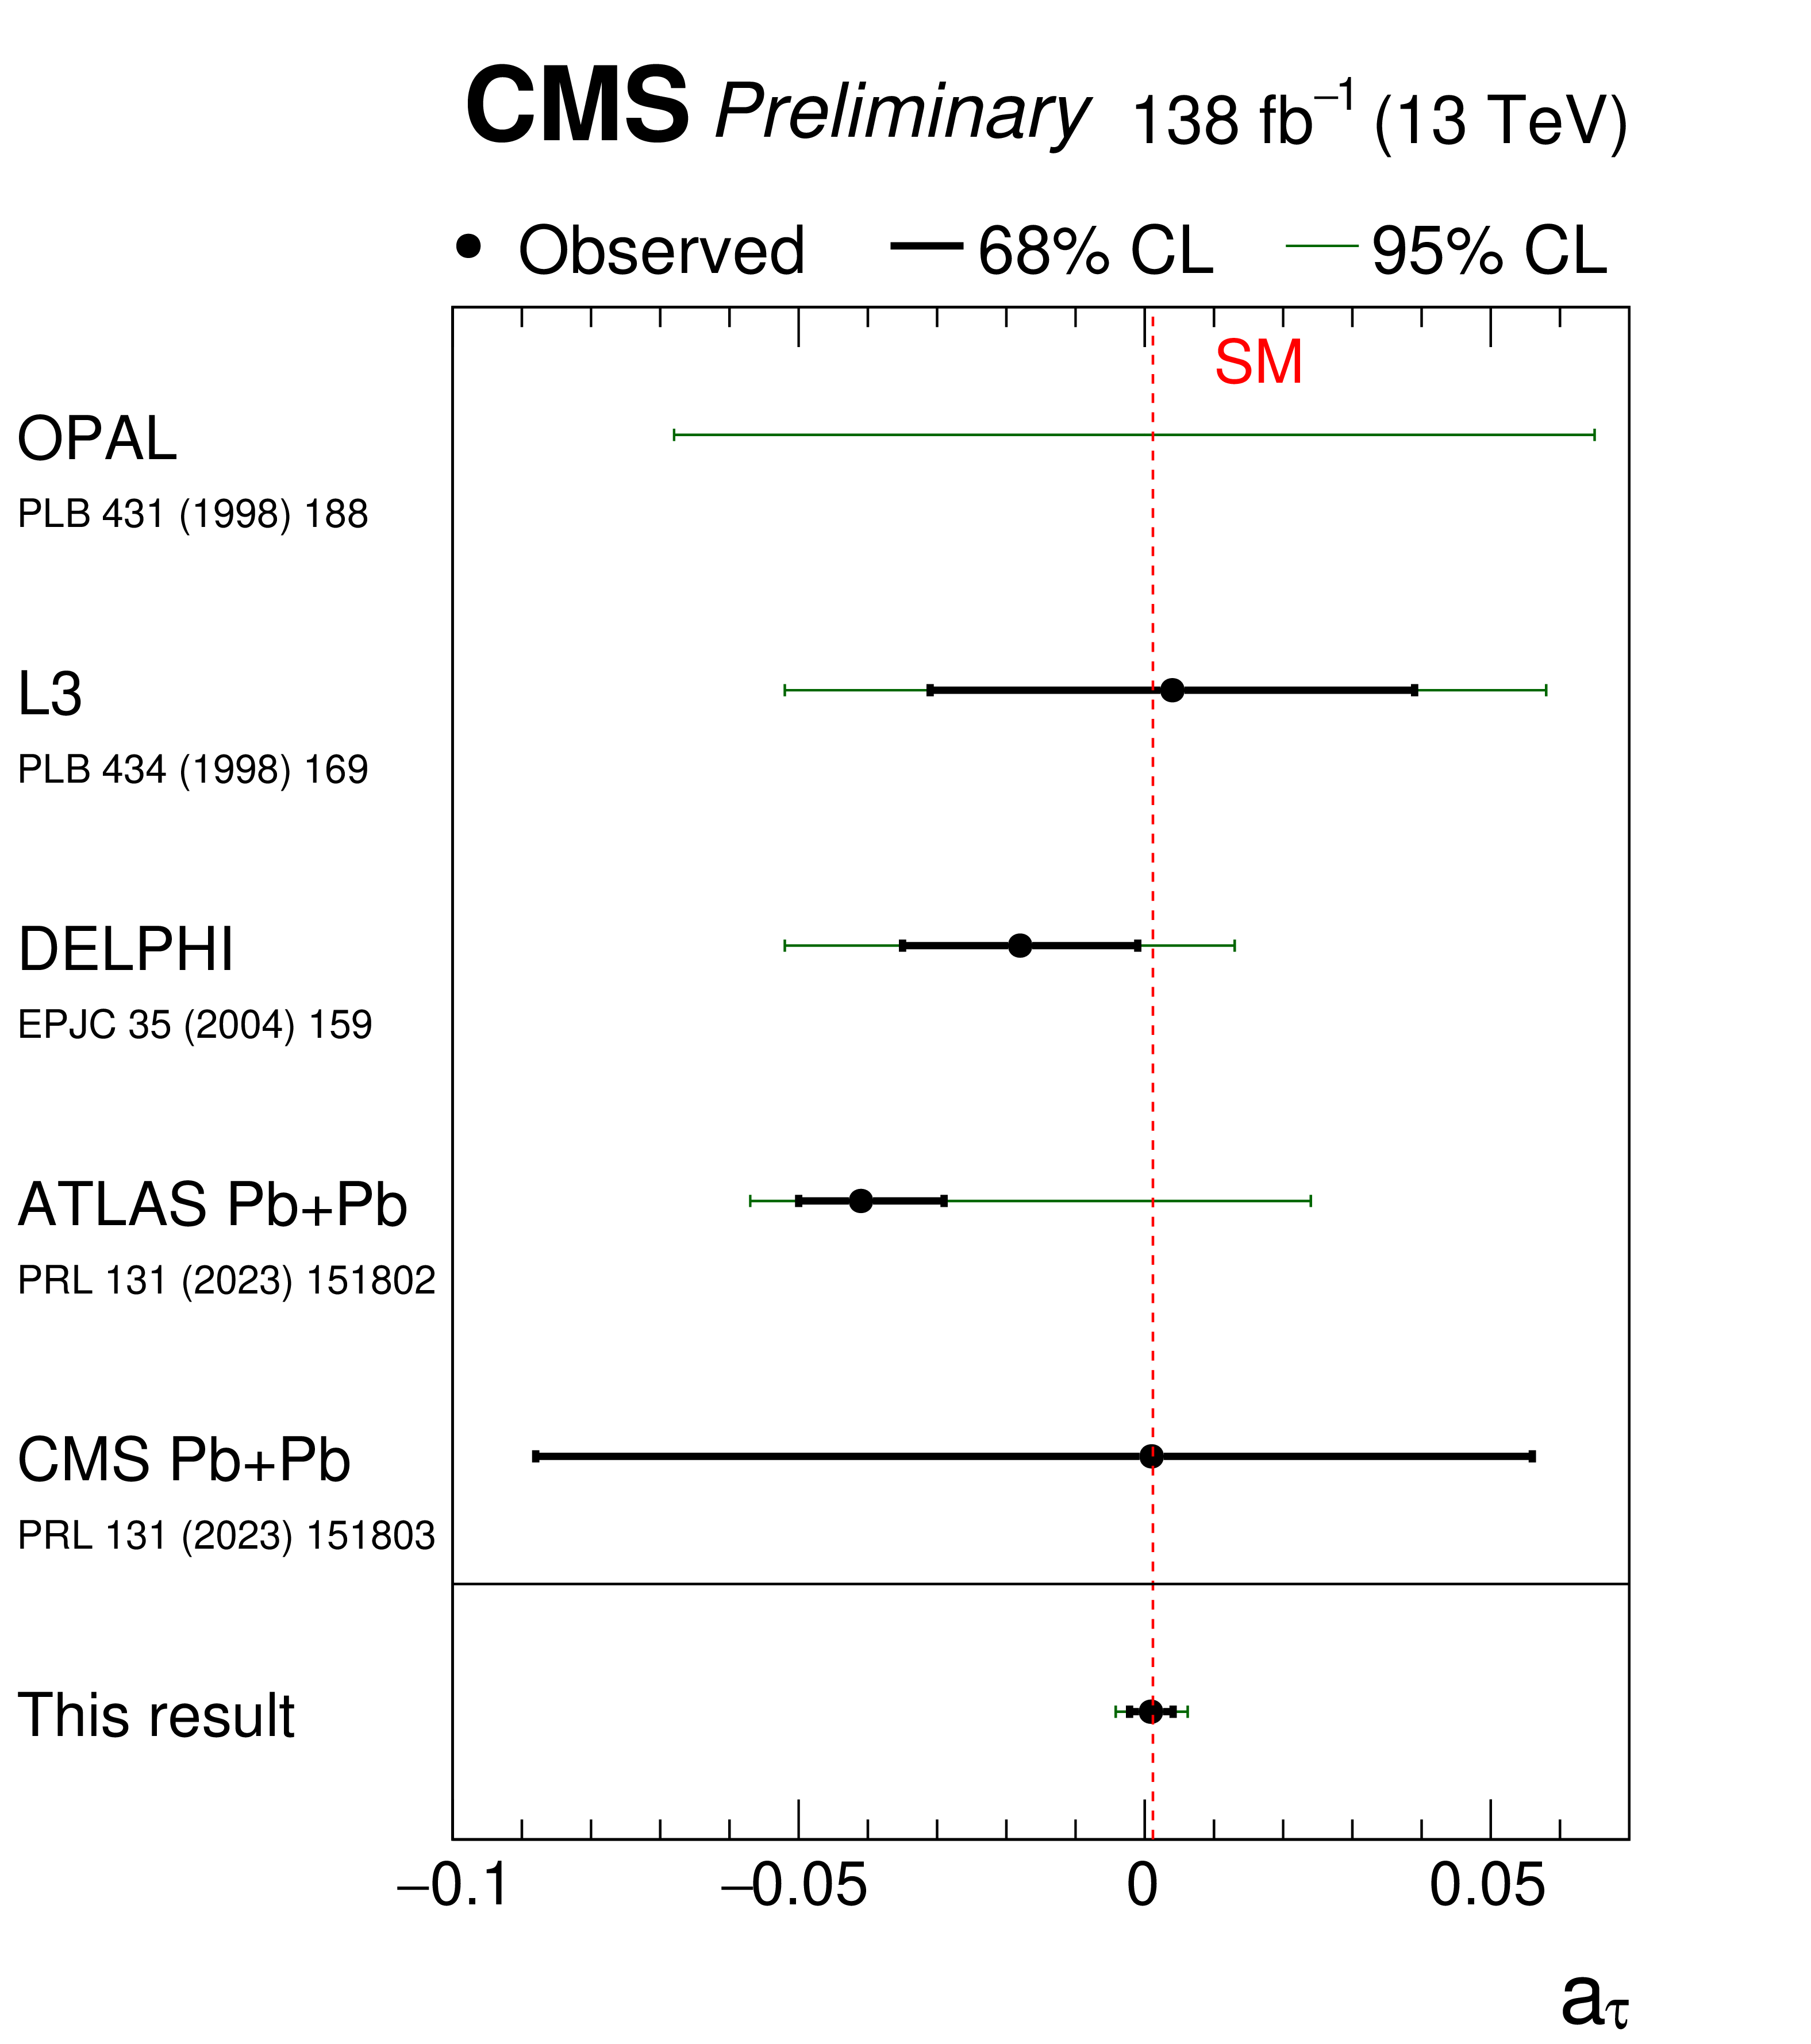 https://cms-results.web.cern.ch/cms-results/public-results/preliminary-results/SMP-23-005/CMS-PAS-SMP-23-005_Figure_012-a.png